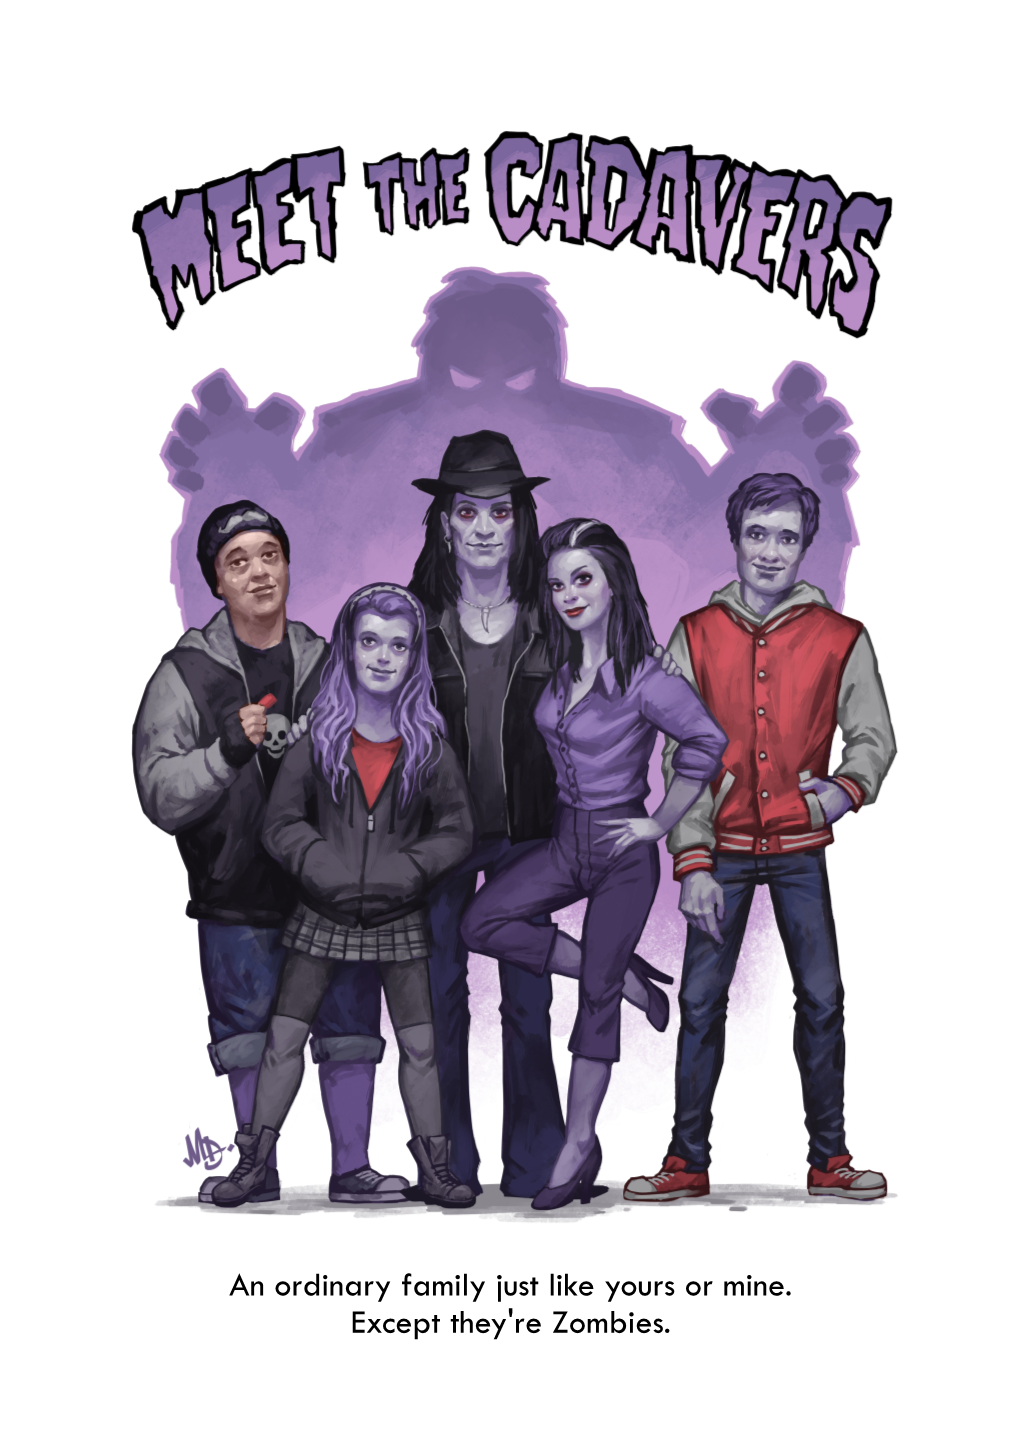 An Ordinary Family Just Like Yours Or Mine. Except They're Zombies. MEET the CADAVERS Is a New, Live-Action Comedy Horror Film Set for Release in 2014